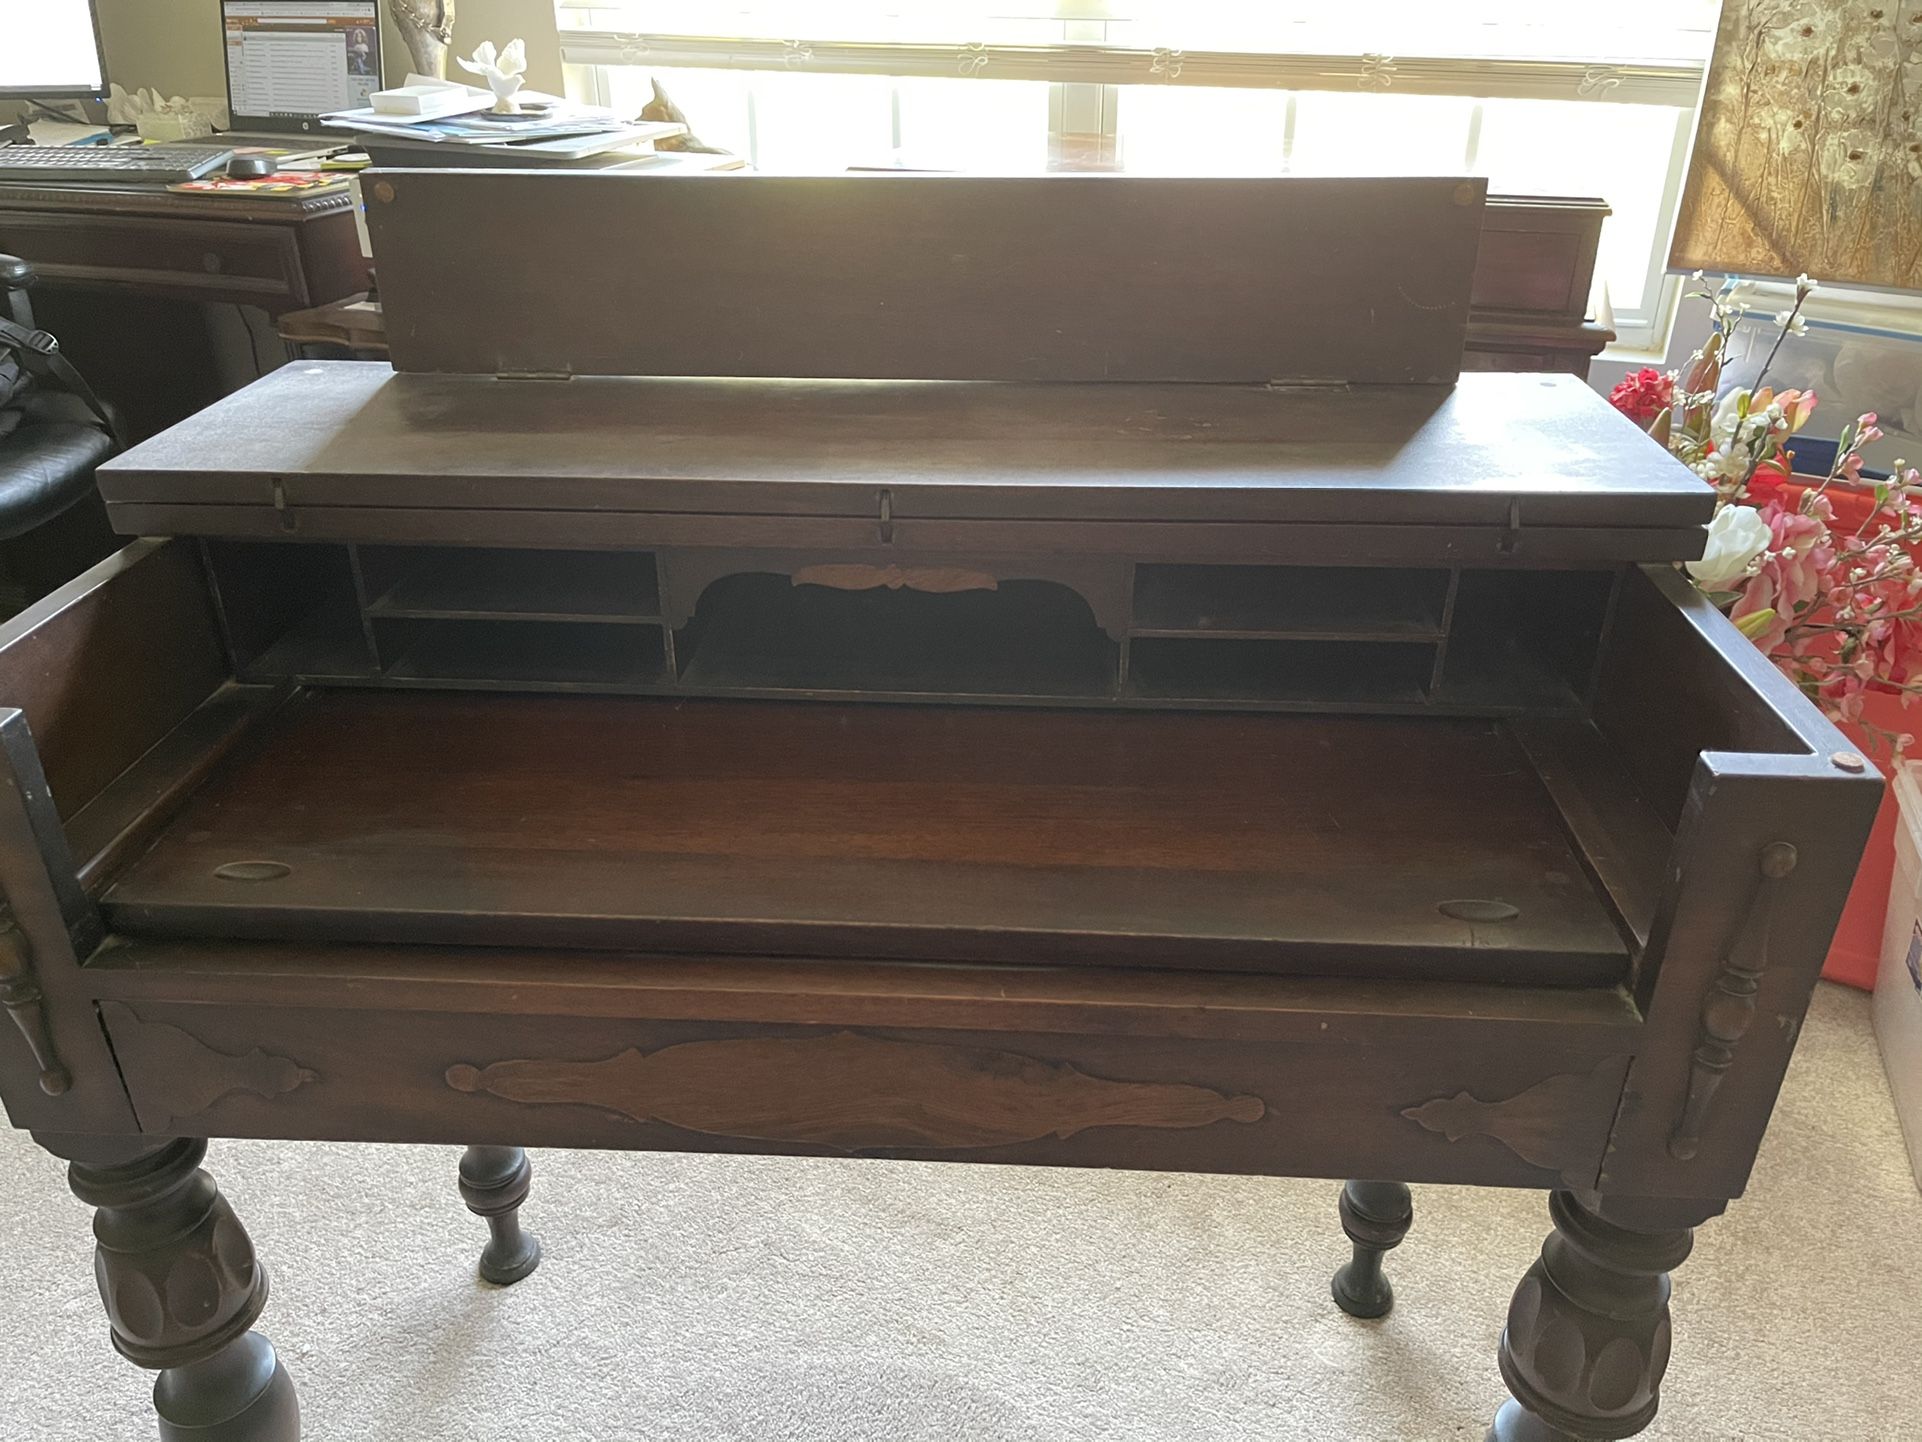 Early 1900’s Antique Spinet Desk - Price Reduced